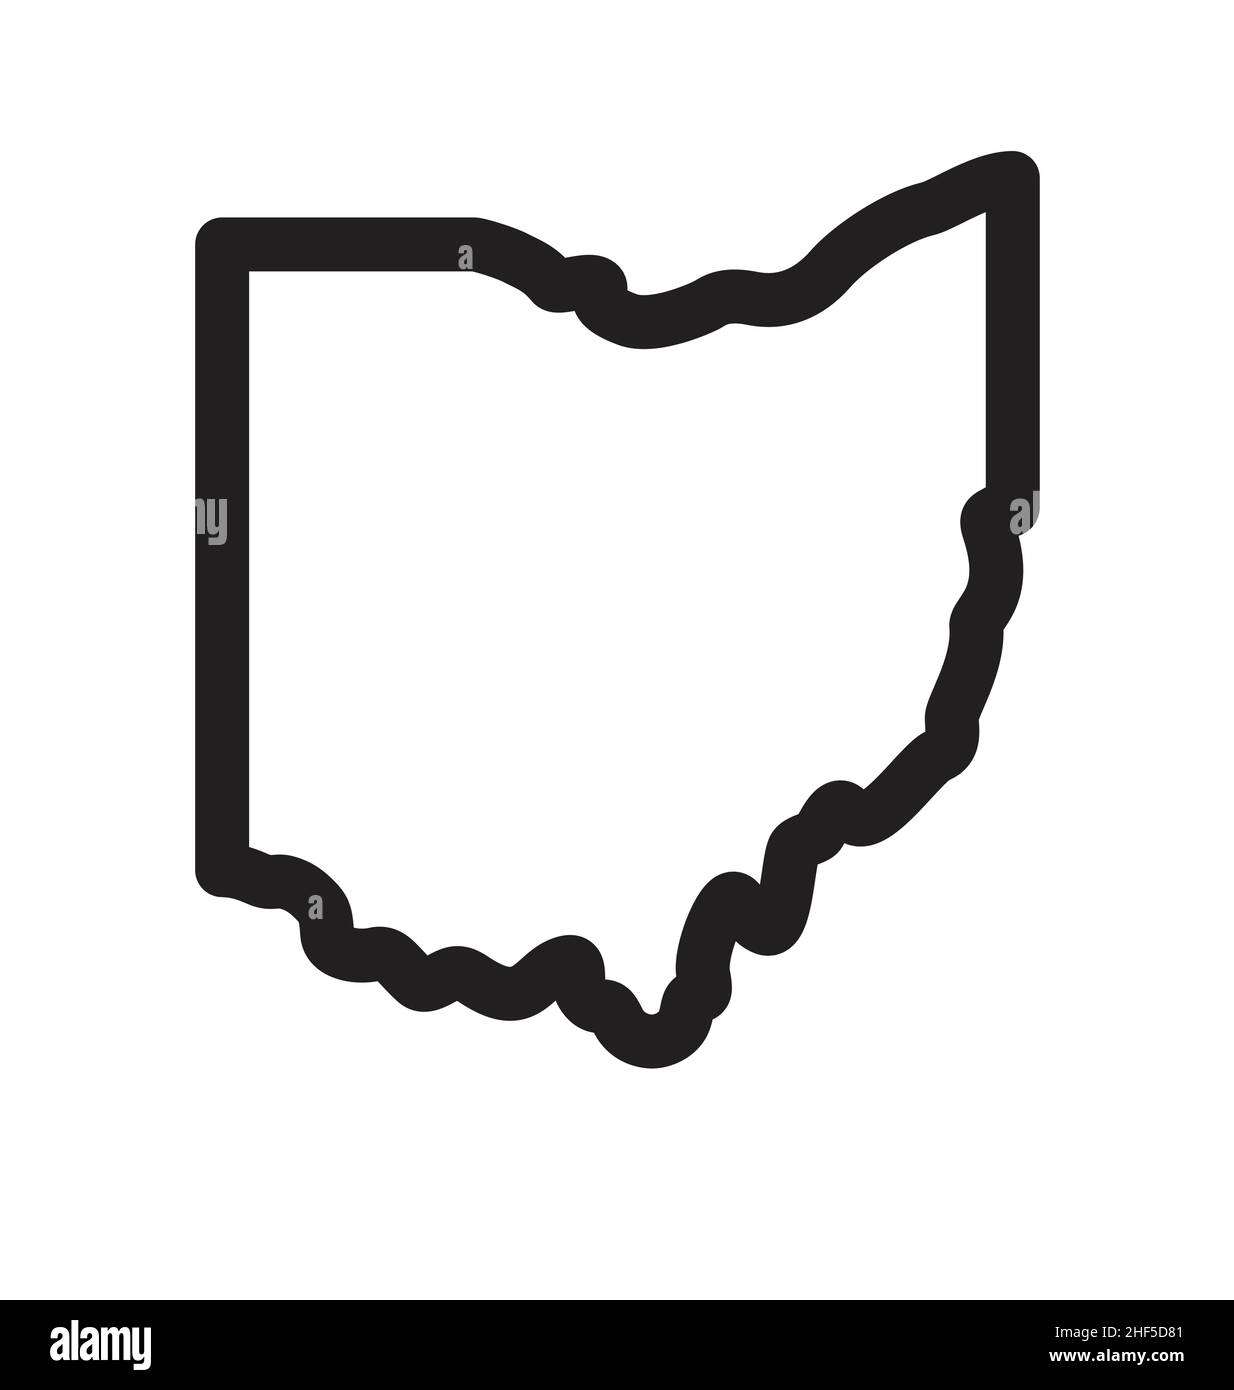 ohio oh state map shape outline simplified vector isolated on white background Stock Vector